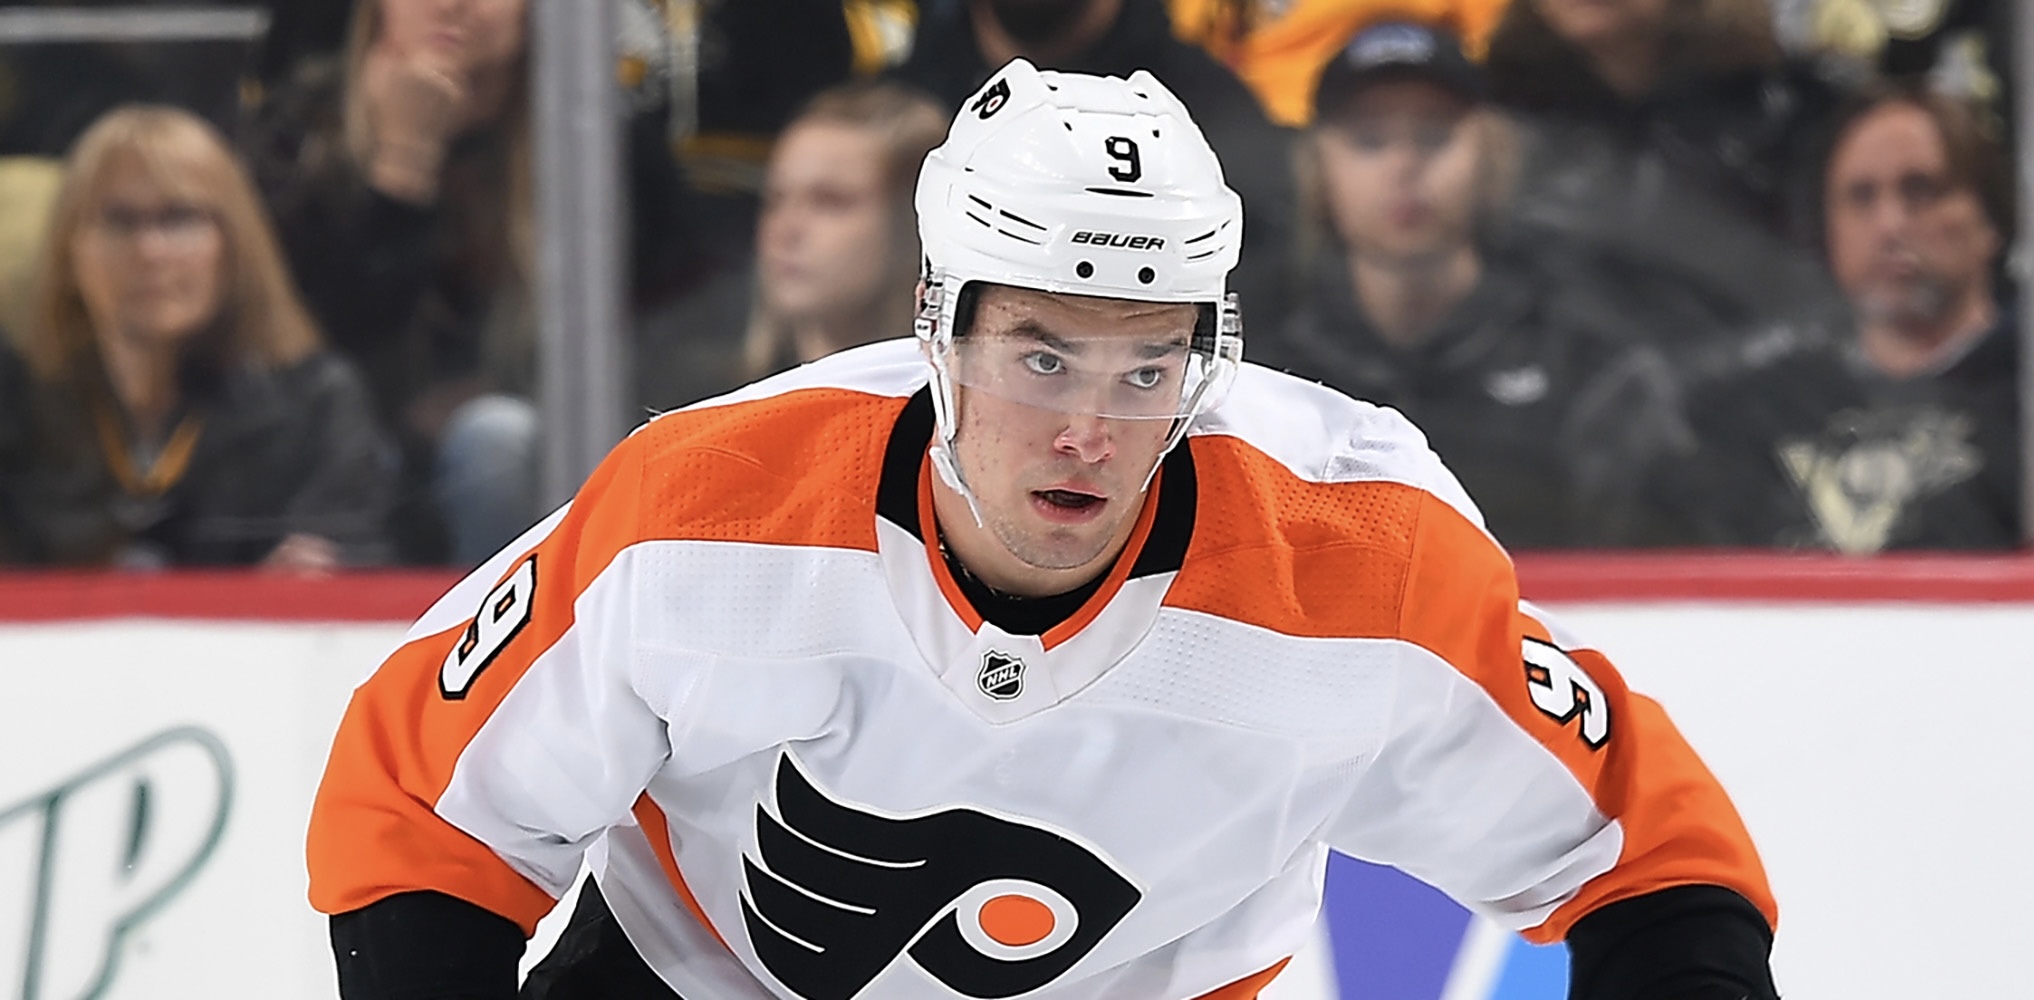 Ivan provorov Sparks Debate After Refusing to Wear Pride Jersey